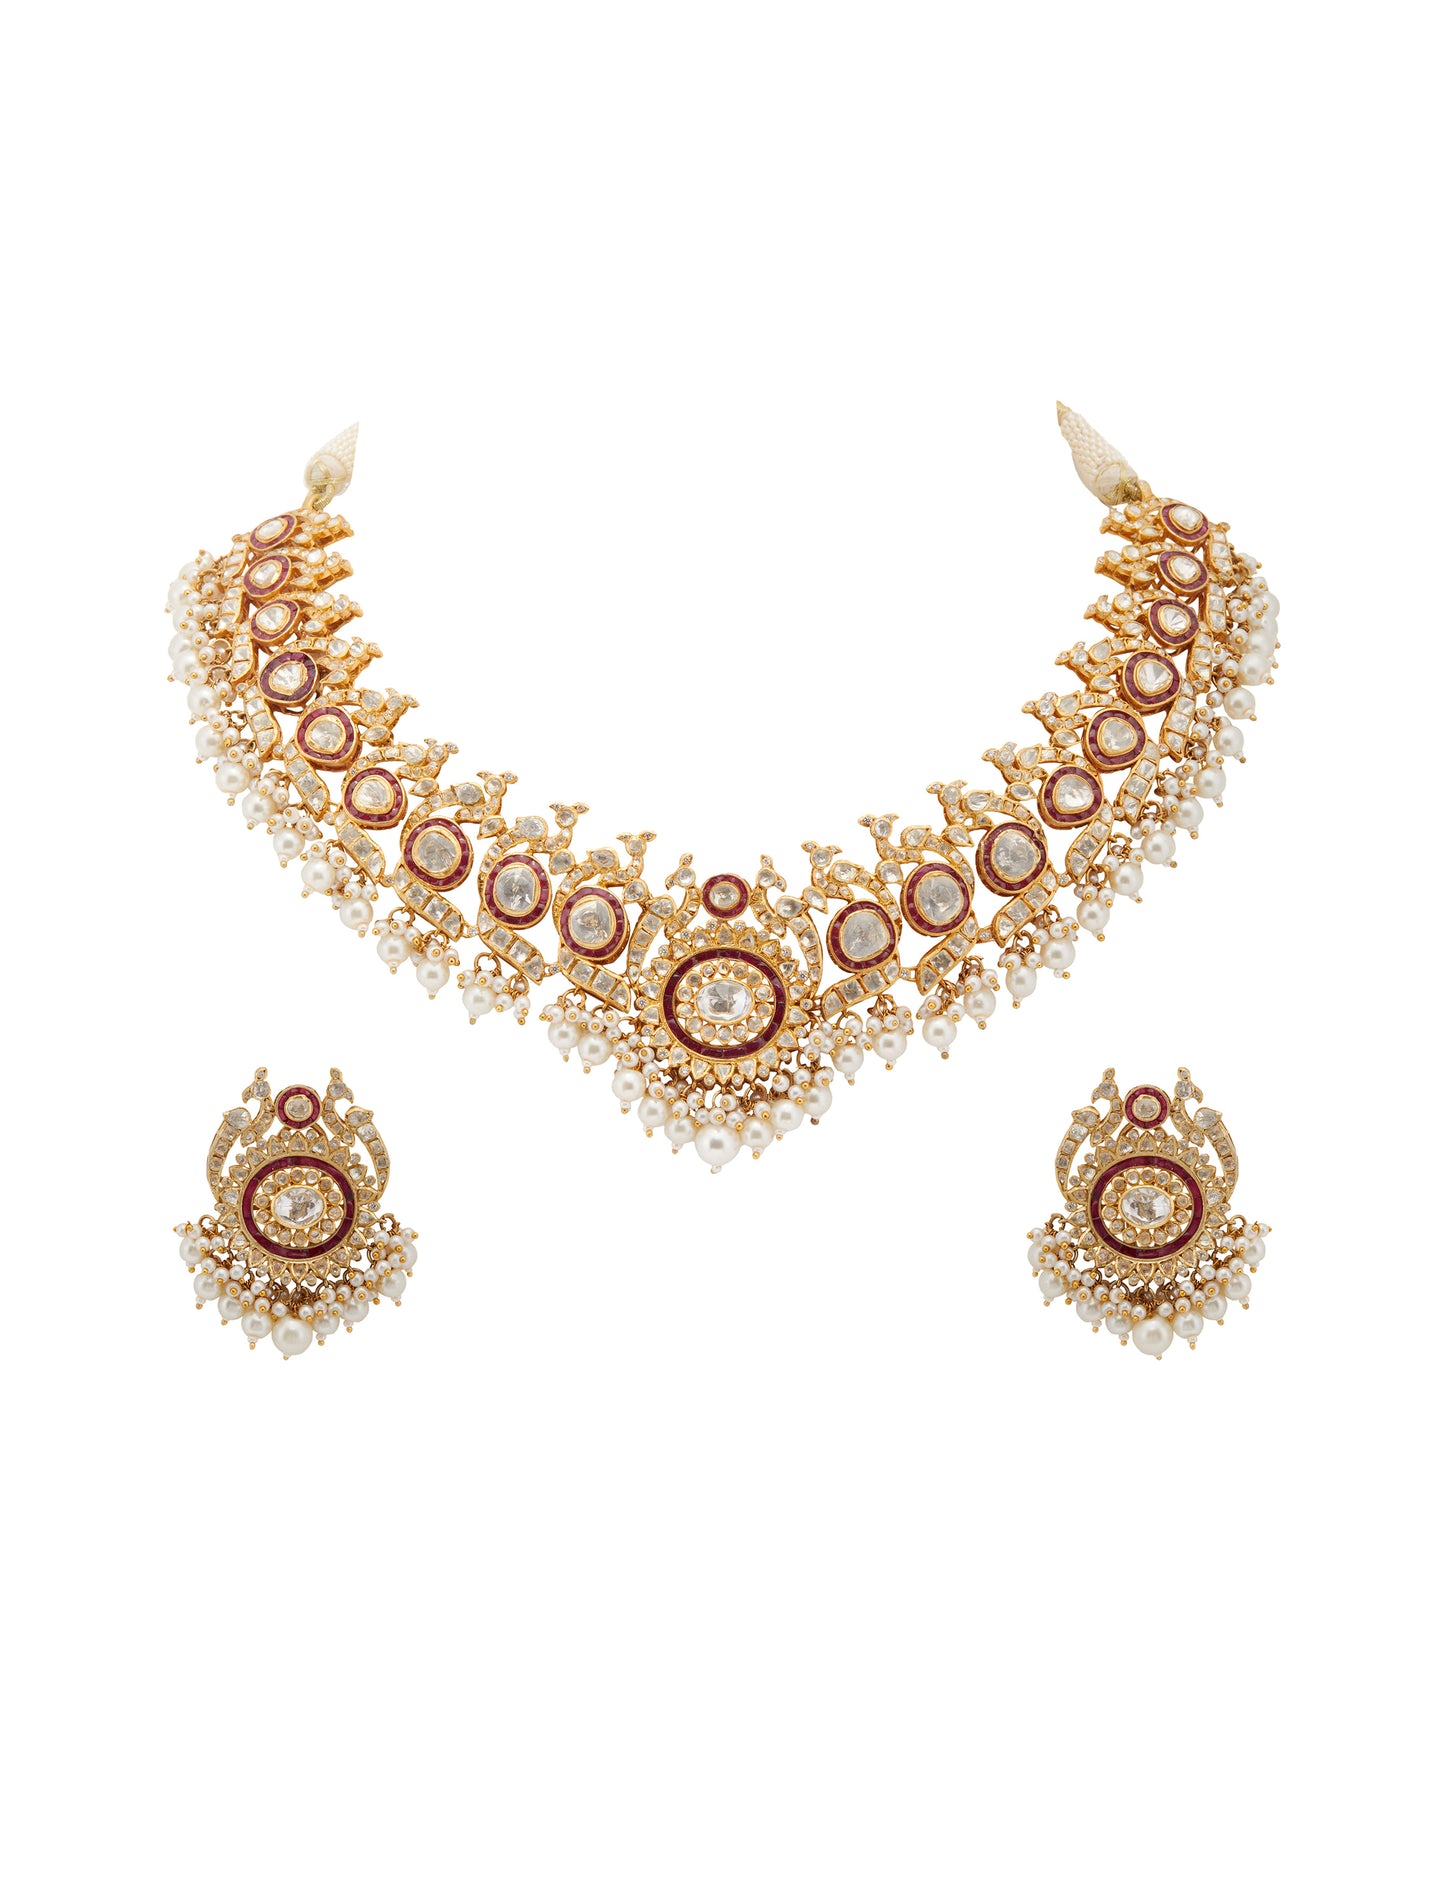 Gold Plated Silver Moissanite Polki & Dia Necklace Set With Red Utrai Bird Motif and Pearls Drops.